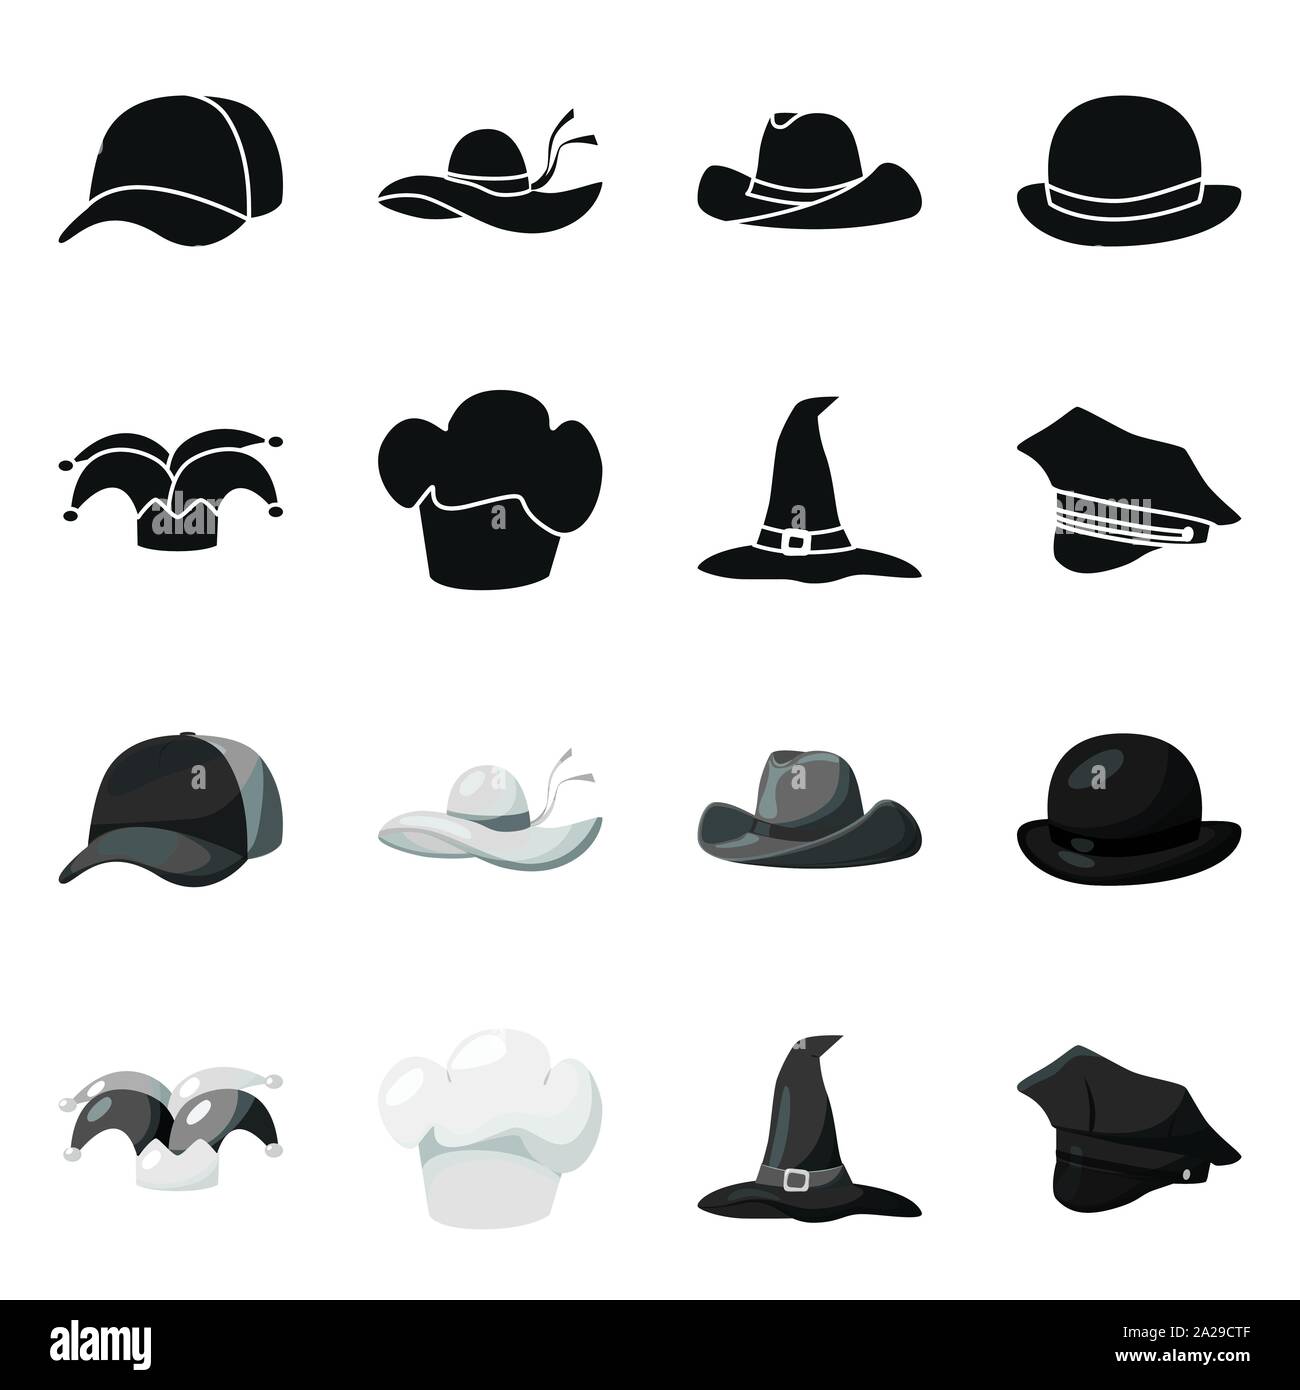 Jester hat vector vectors Black and White Stock Photos Images Page 3 -